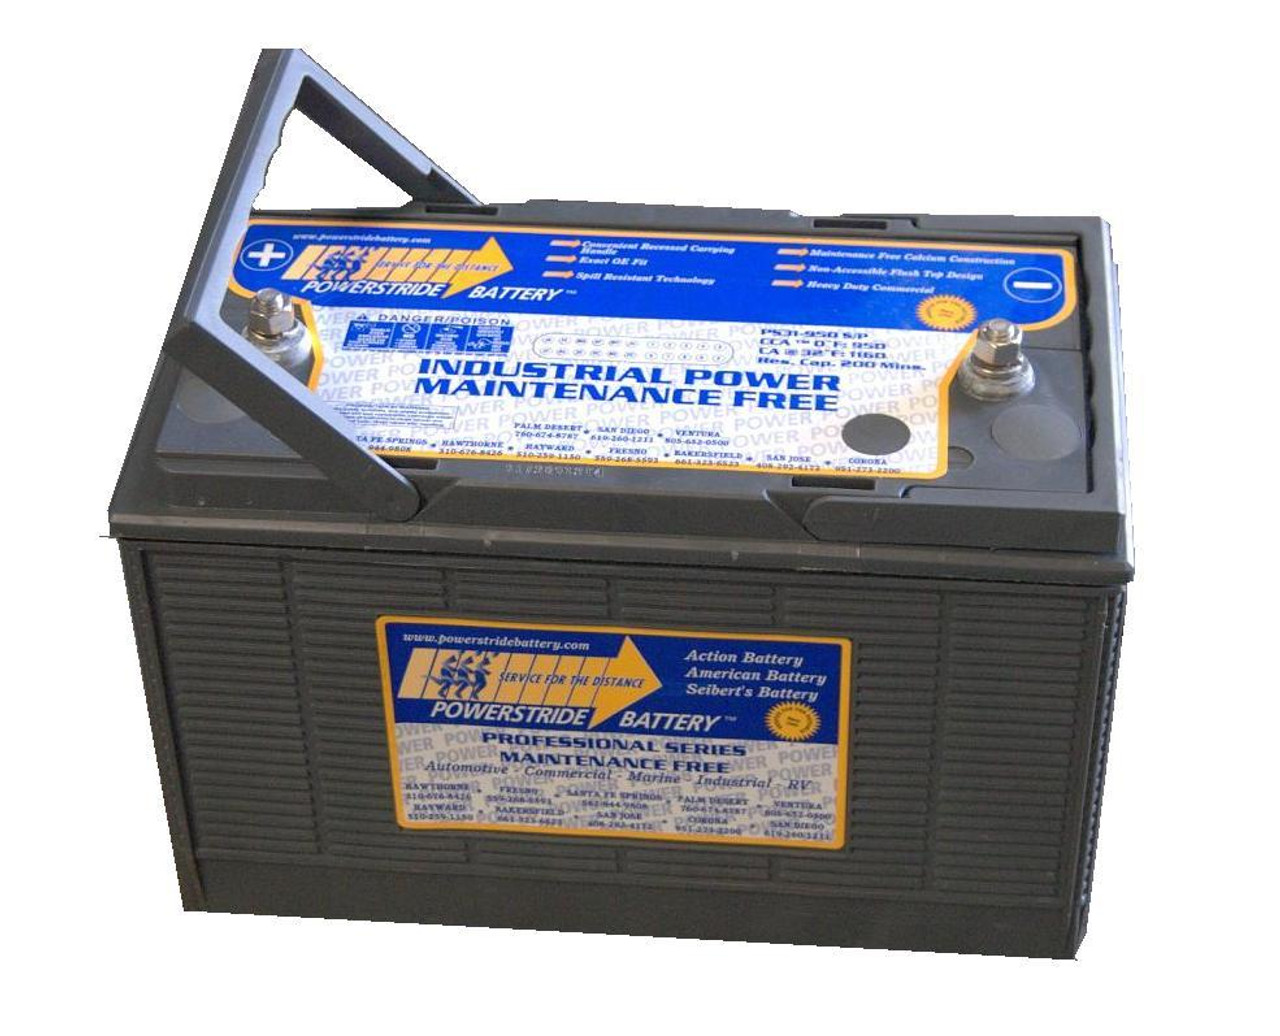 Powerstride - Ford CL-9000 engines) Diesel Battery (1985-1990)